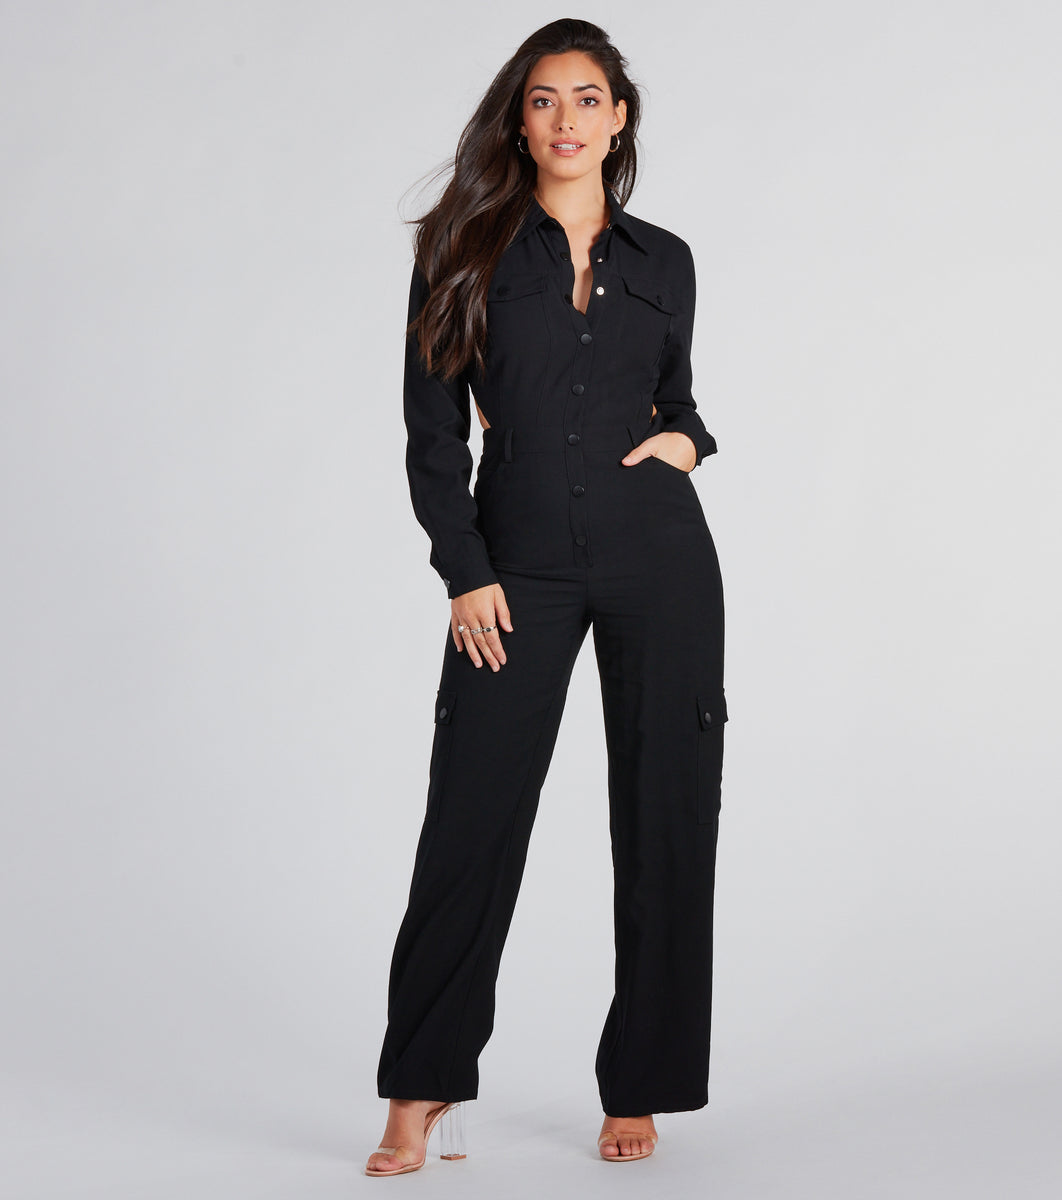 Open To Fun Long Sleeve Backless Jumpsuit & Windsor